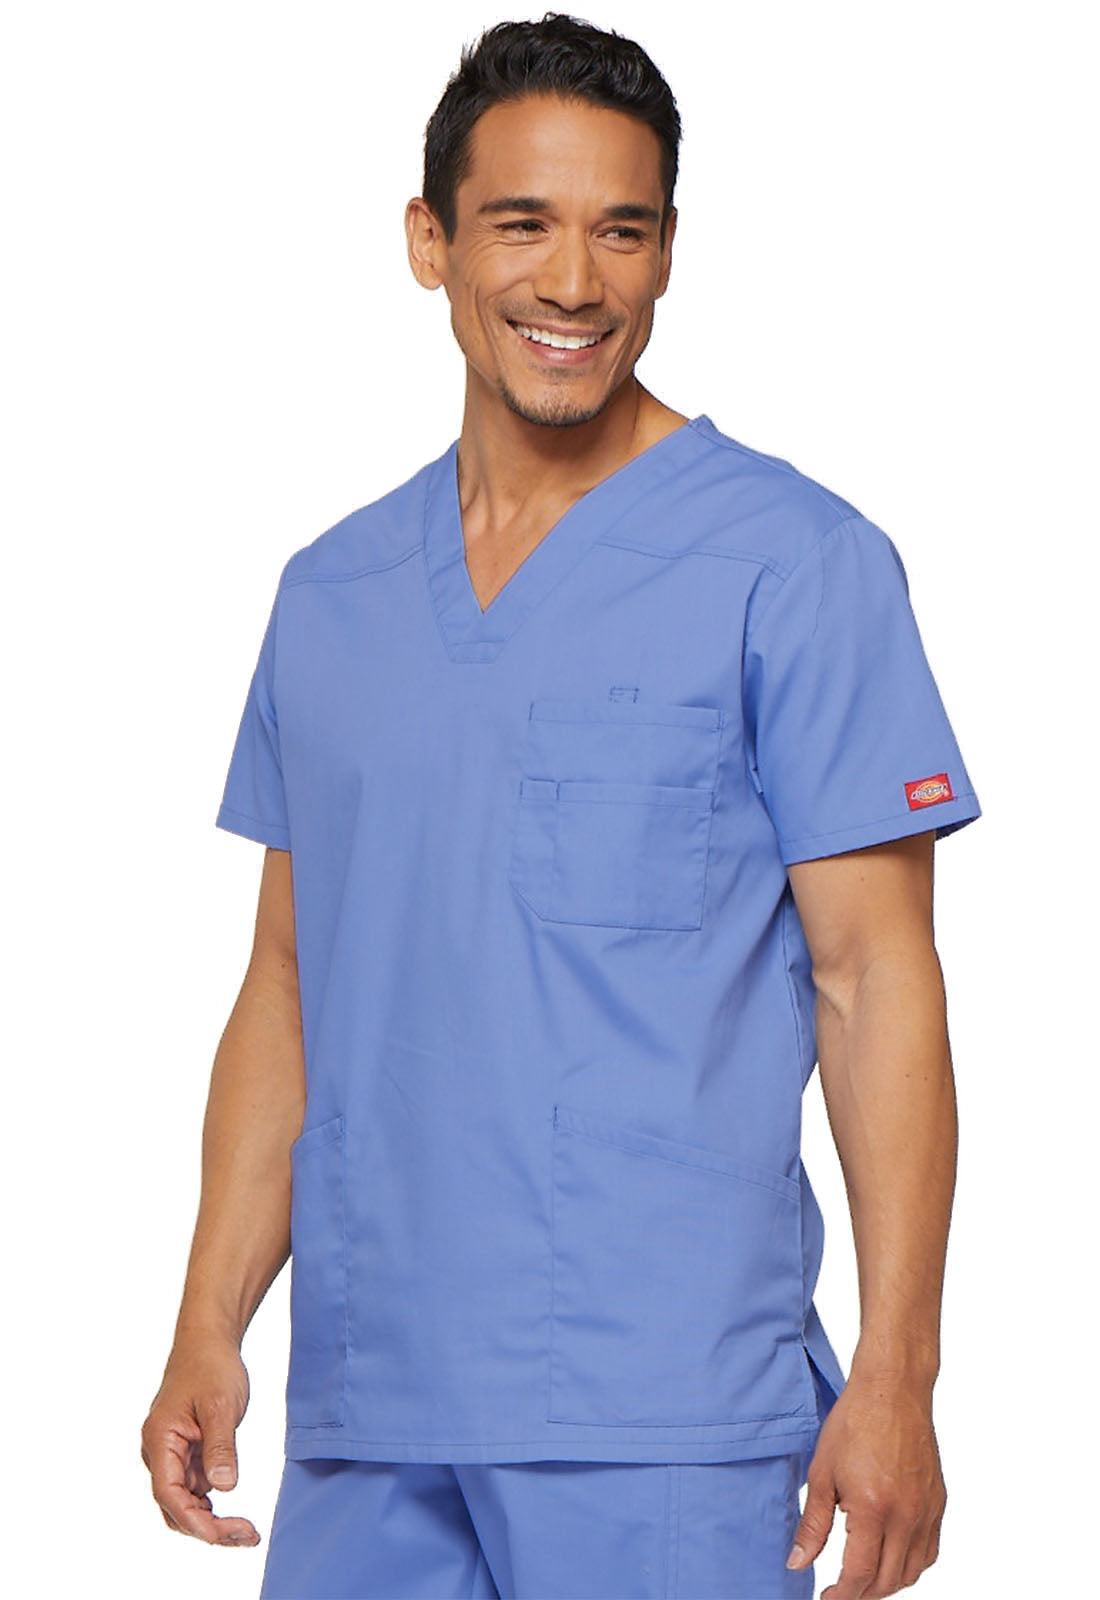 DDSEWHAPPYSCRUBS Solid Black Scrub Top with Cincinnati Reds Baseball Fabric on *Neck Band & Pocket options* Medical Scrub Top Unisex Style Shirt for Men & Women S / 2